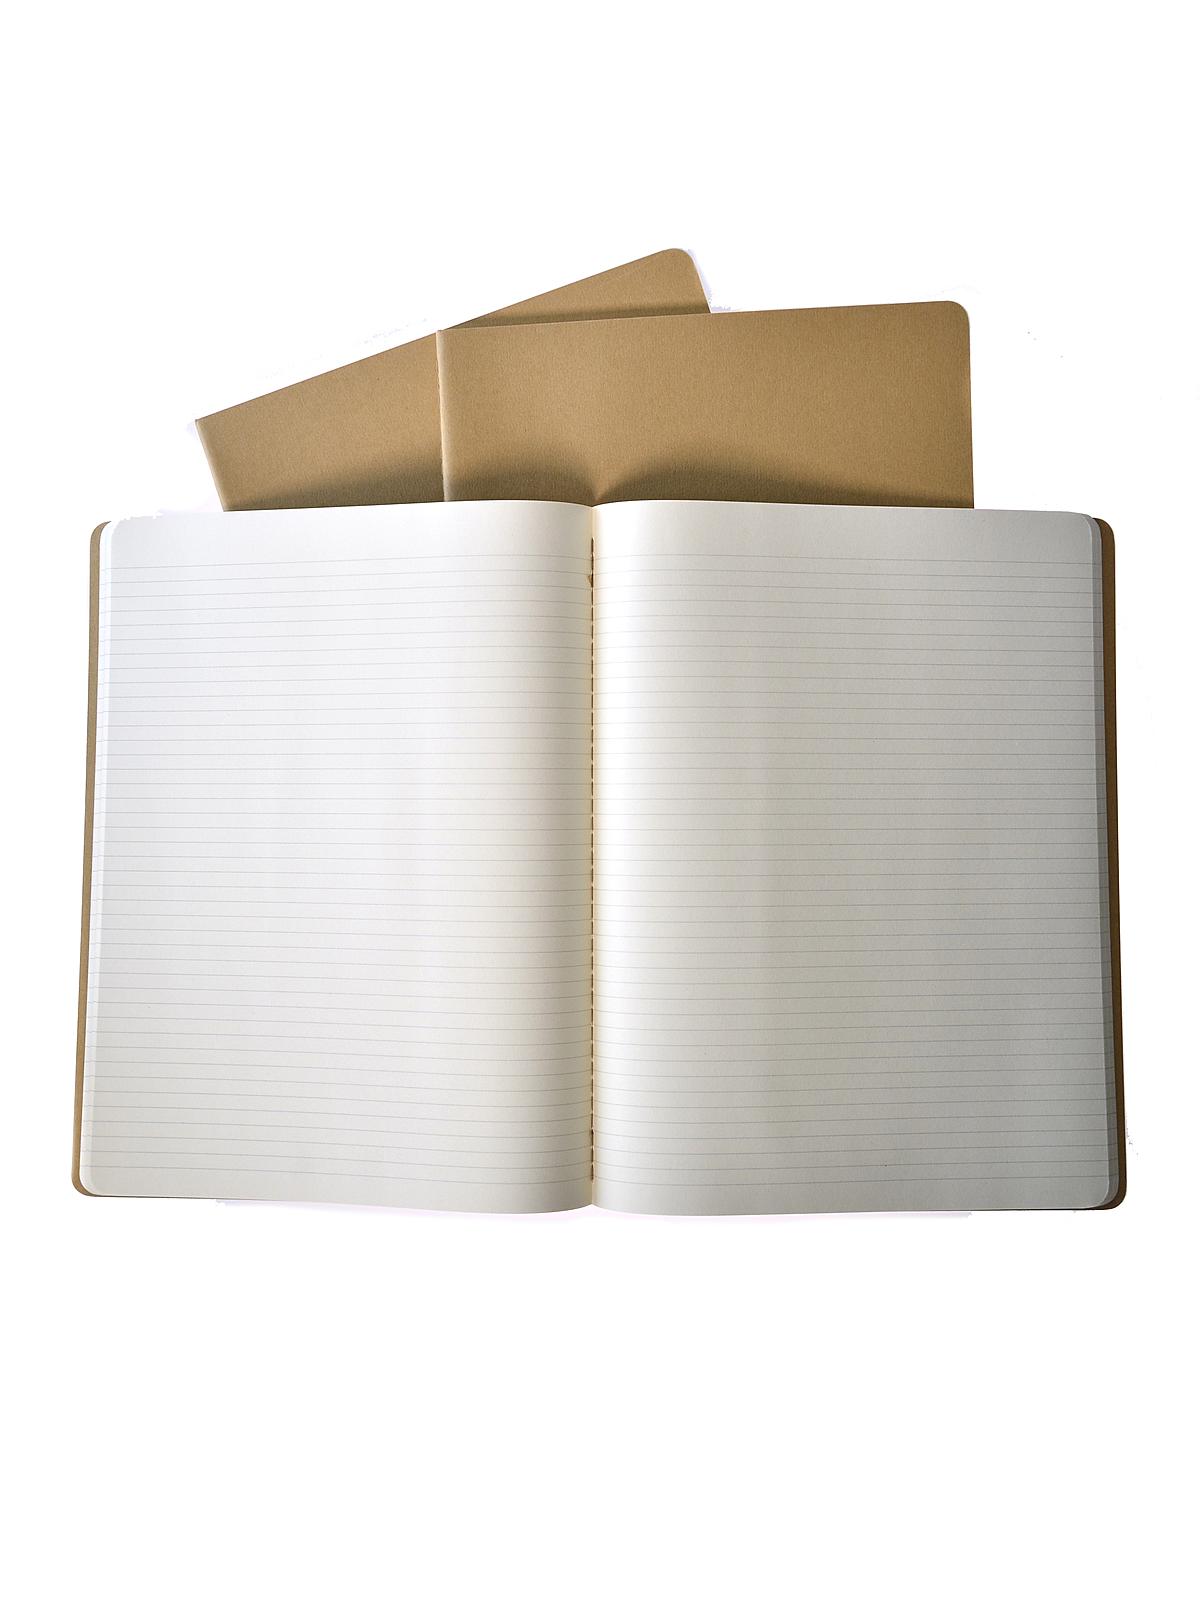 Cahier Journals Kraft Brown, Ruled 8 1 2 In. X 11 In. Pack Of 3, 120 Pages Each